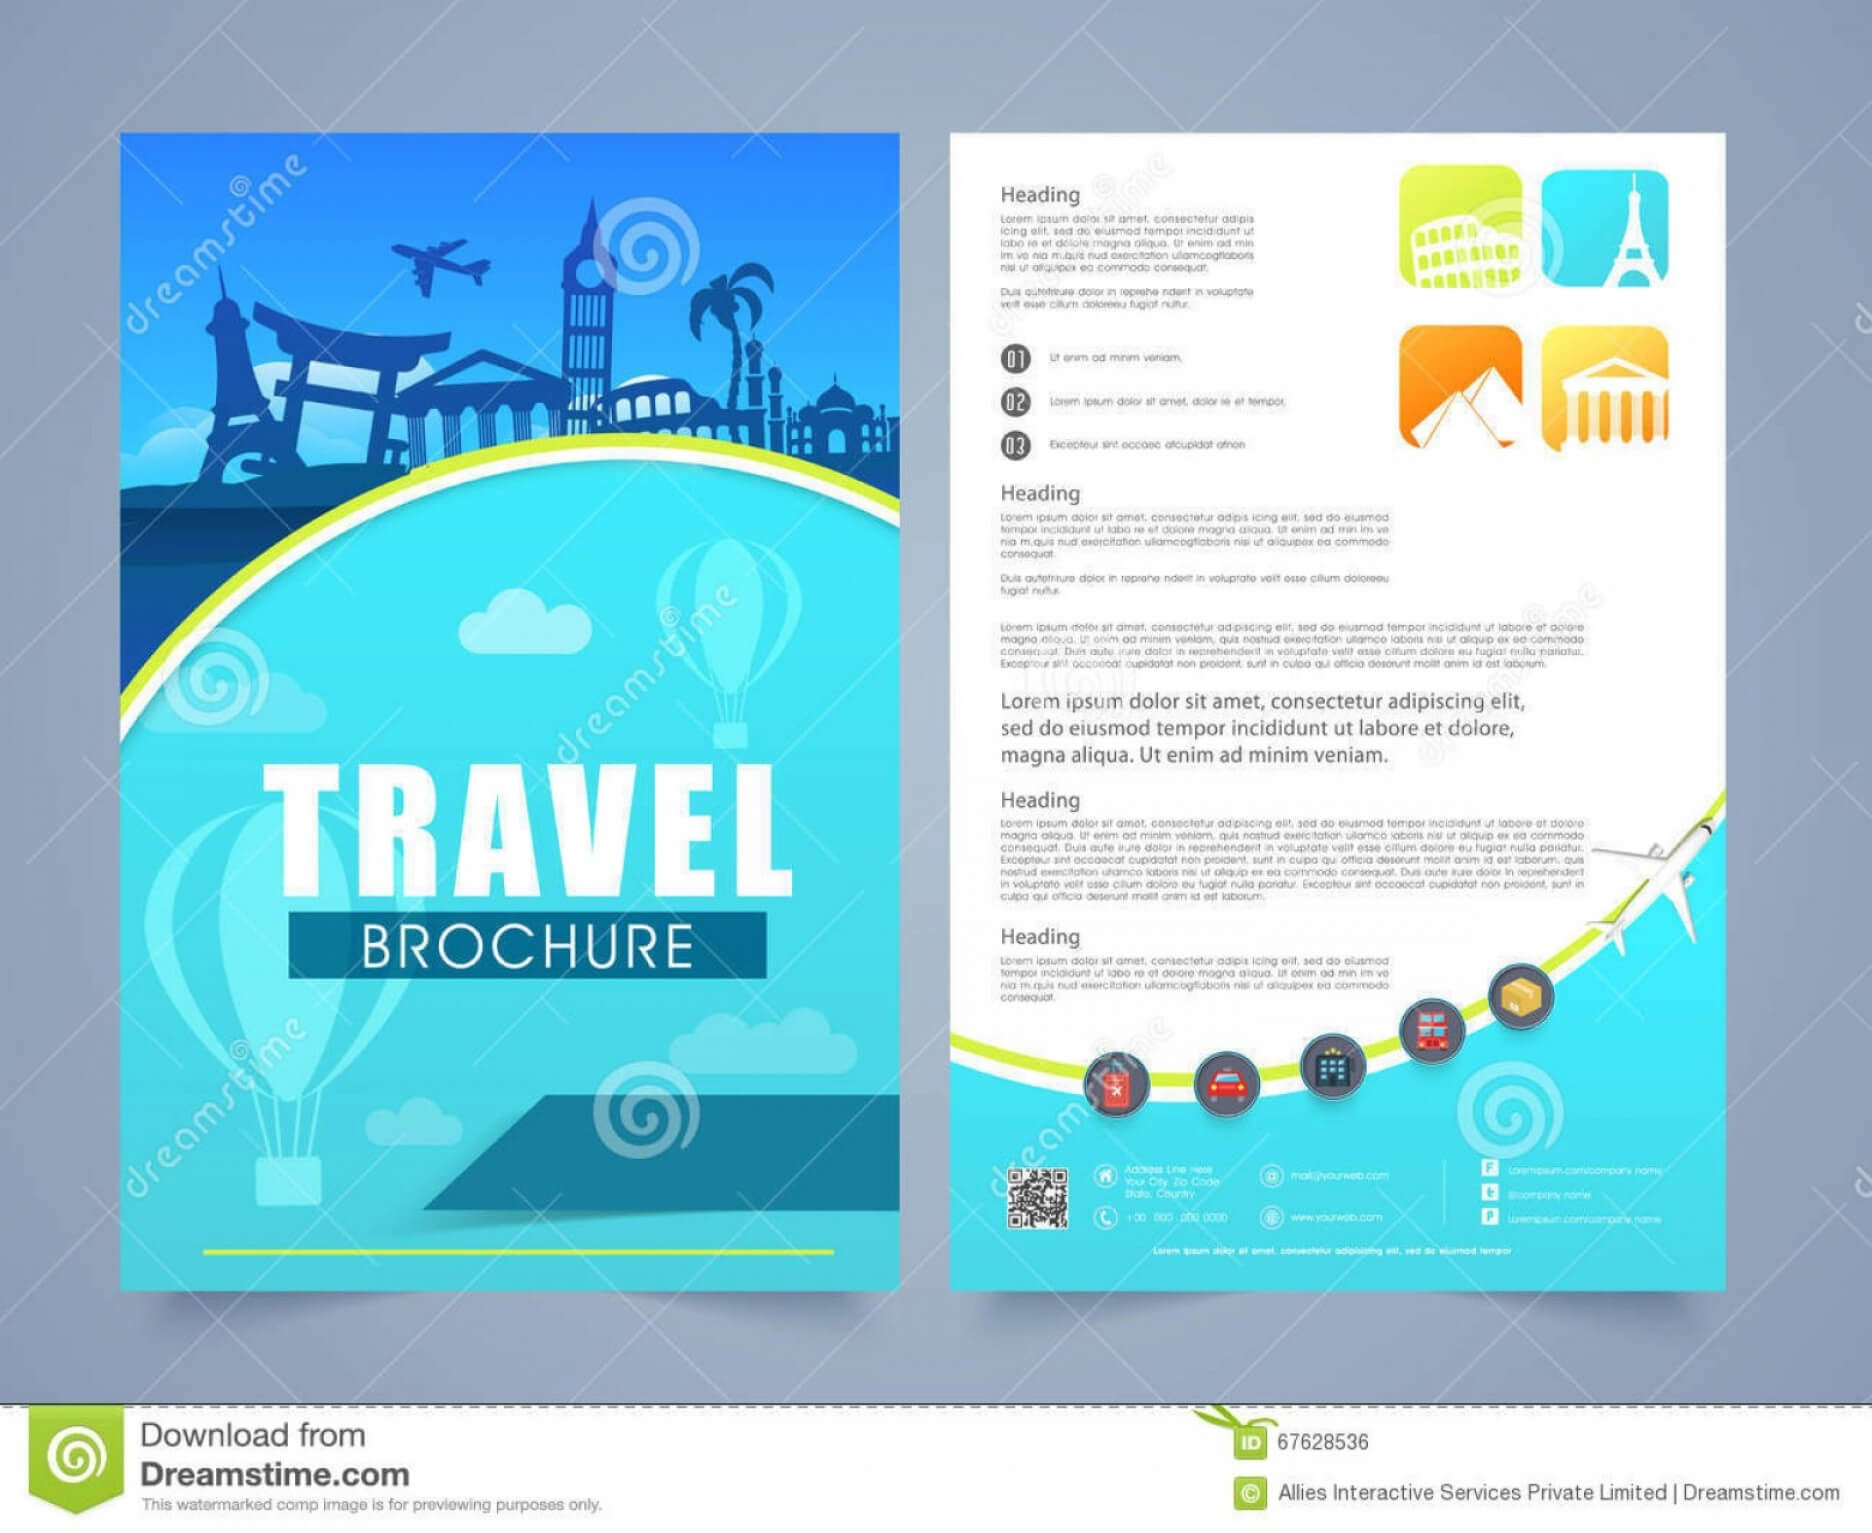 Travel And Tourism Brochure Templates Free | Studiogrfx Inside Travel And Tourism Brochure Templates Free